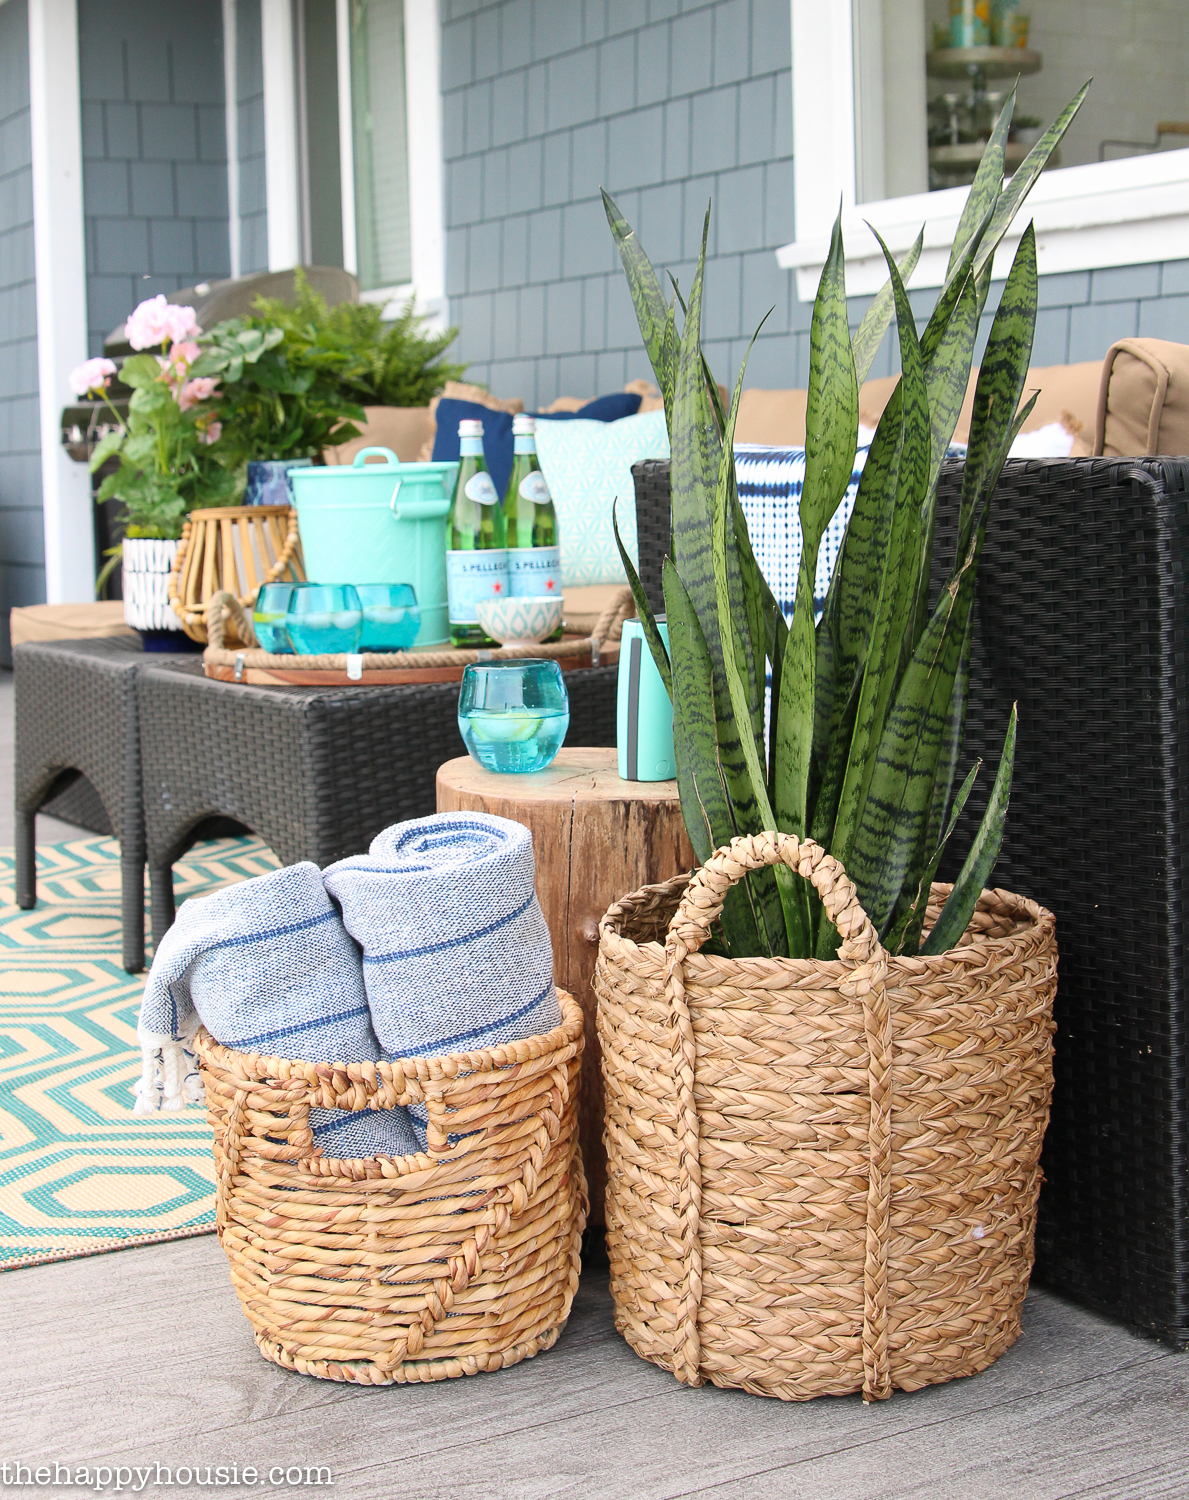 Large wicker baskets on the porch with a plant in one and rolled up blankets in another.